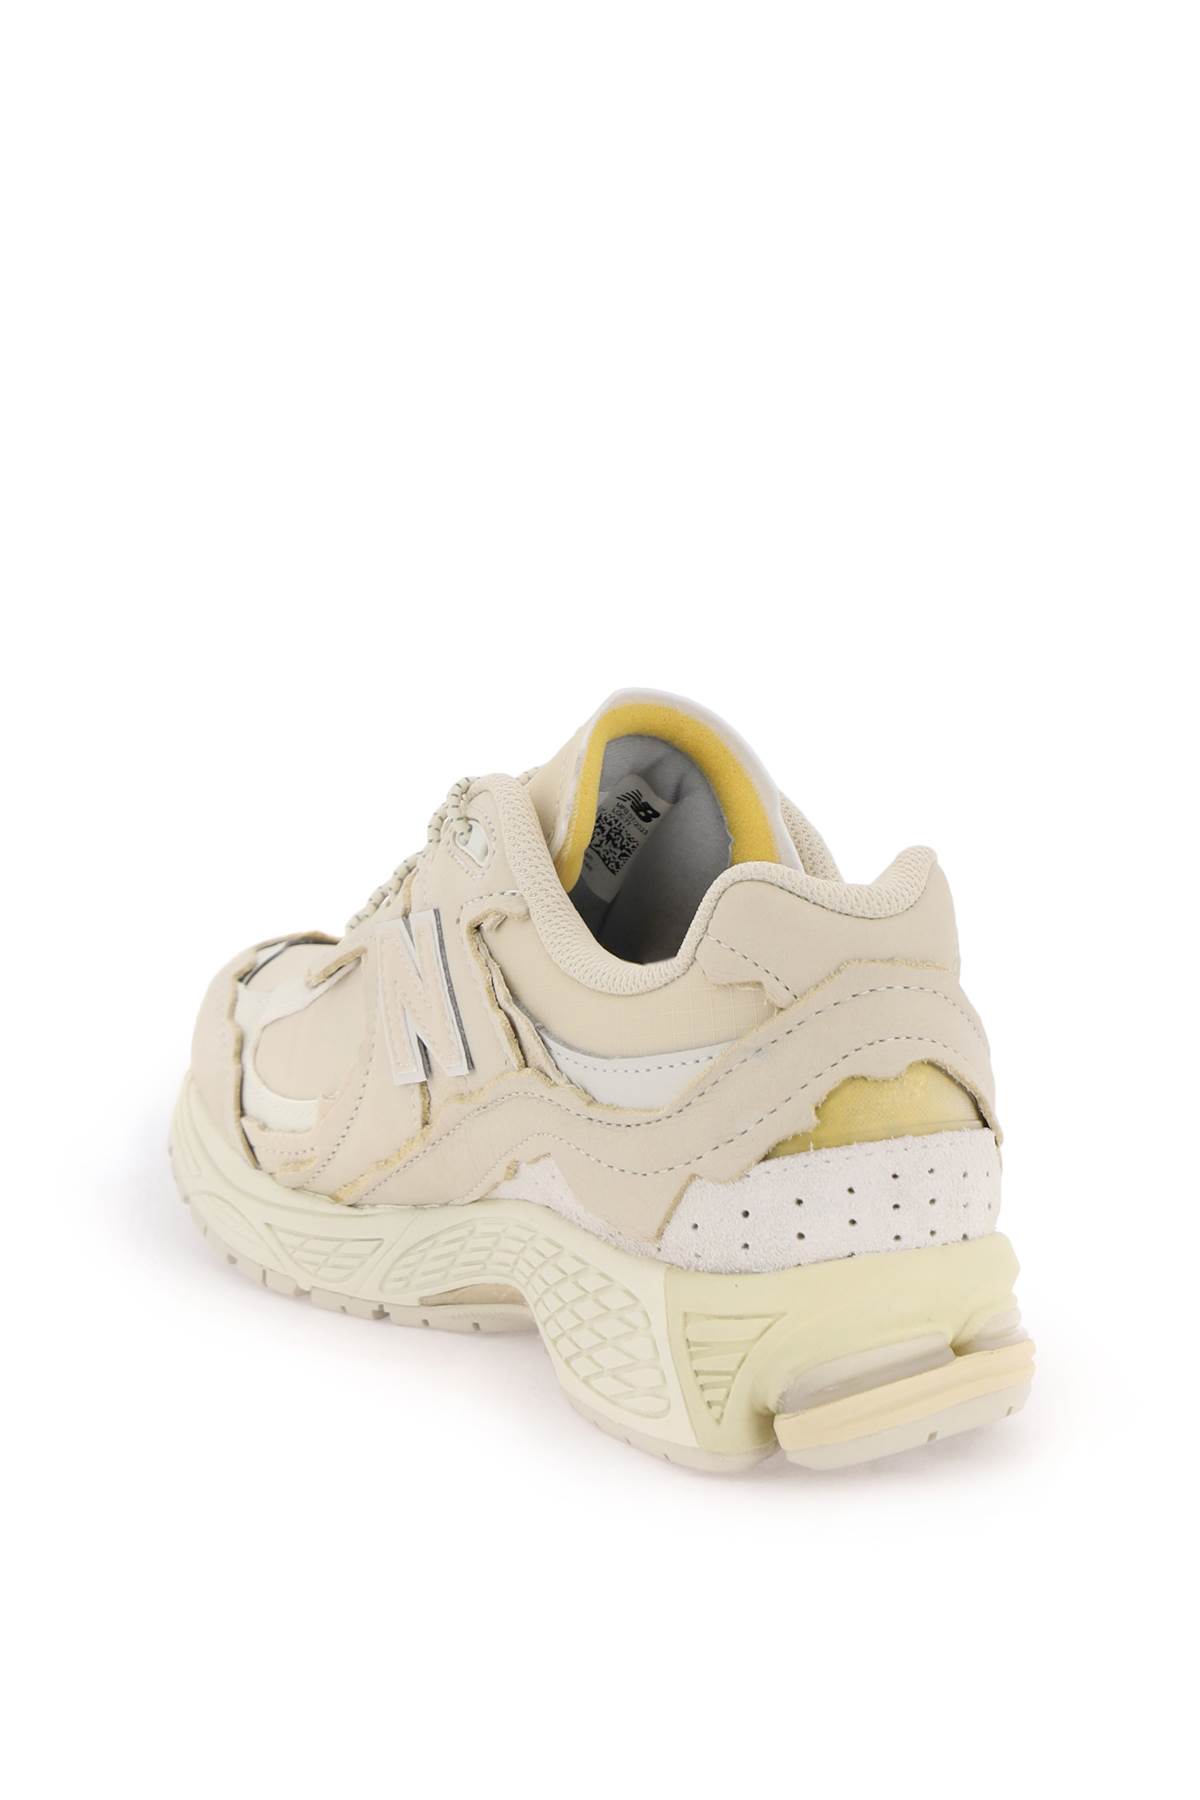 Shop New Balance 2002rd Sneakers In Sand Stone (beige)